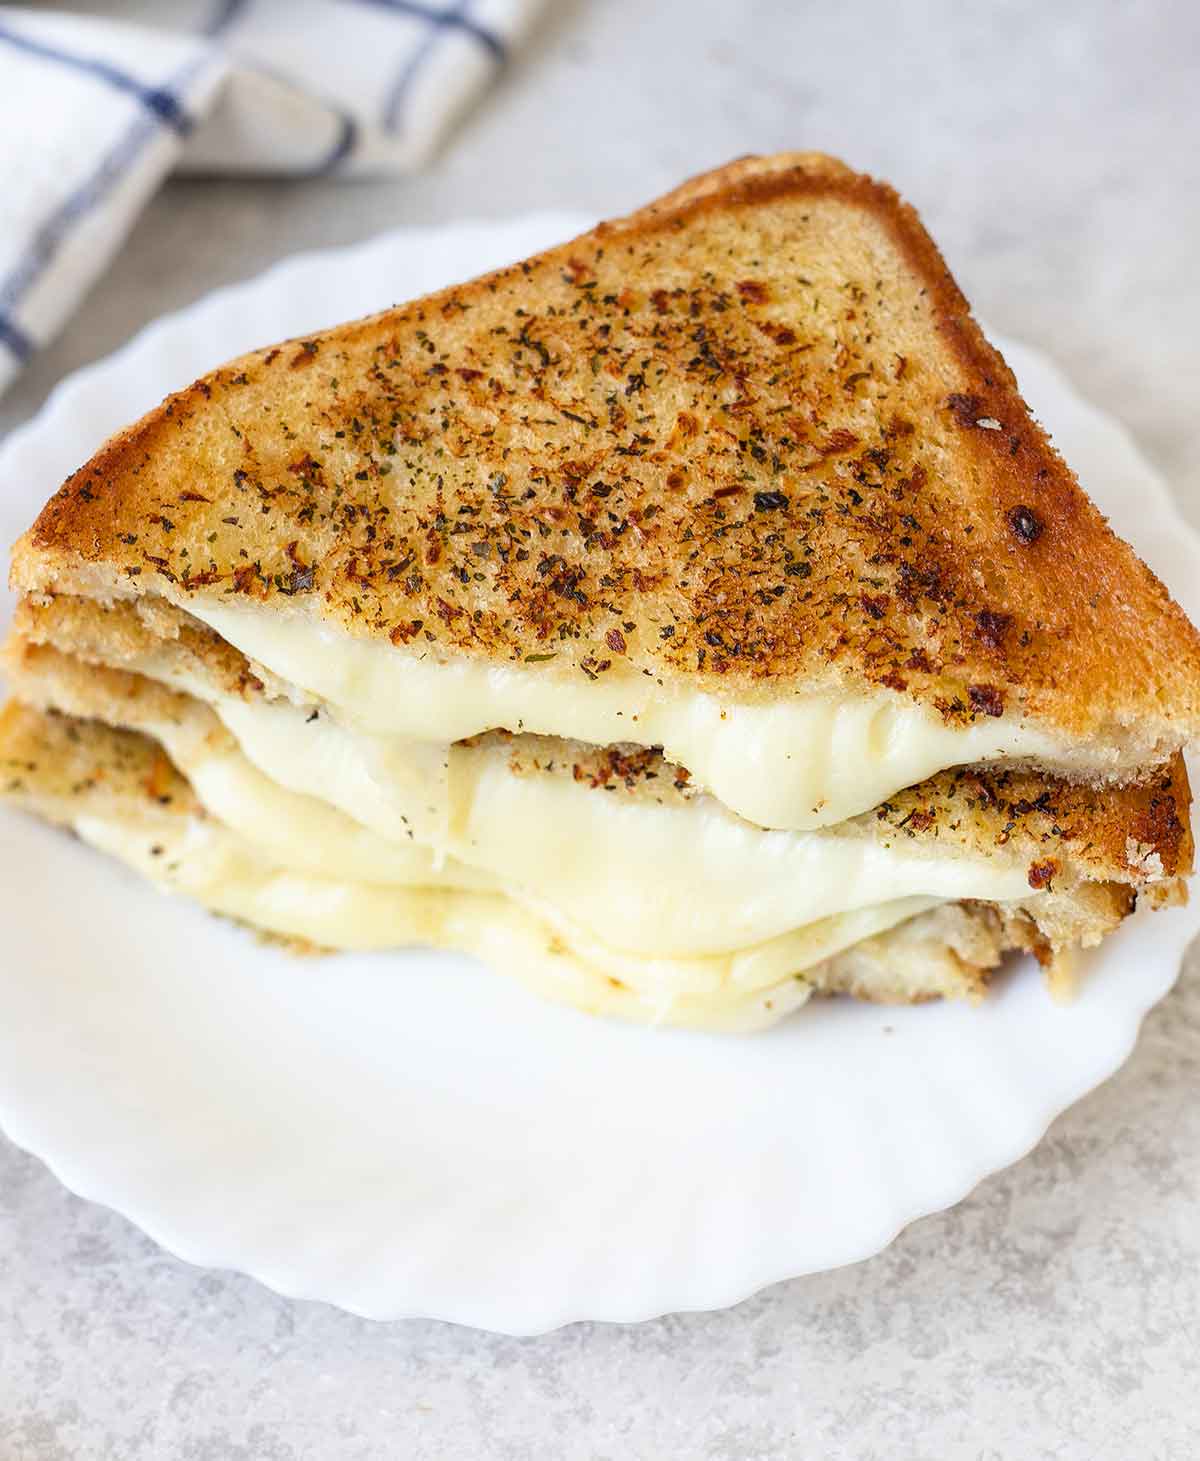 Garlic bread grilled cheese sandwich with gooey melted cheese centre.